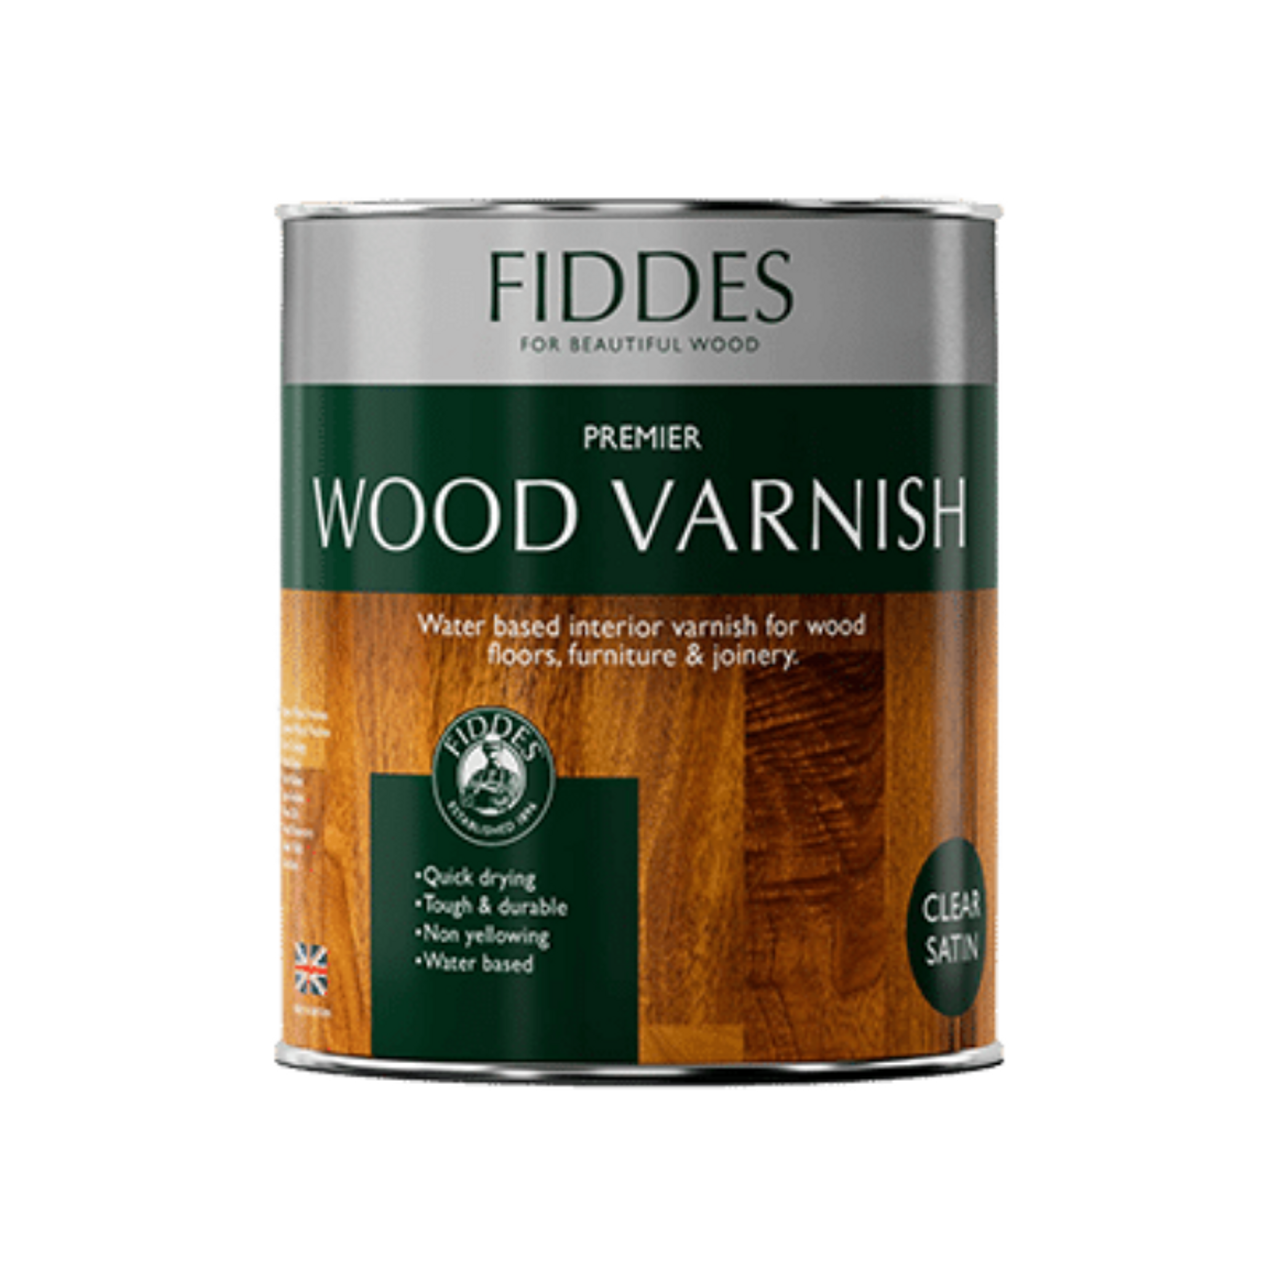 FIDDES Premier Wood Varnish for Hardwood Woodworking and Flooring Projects.